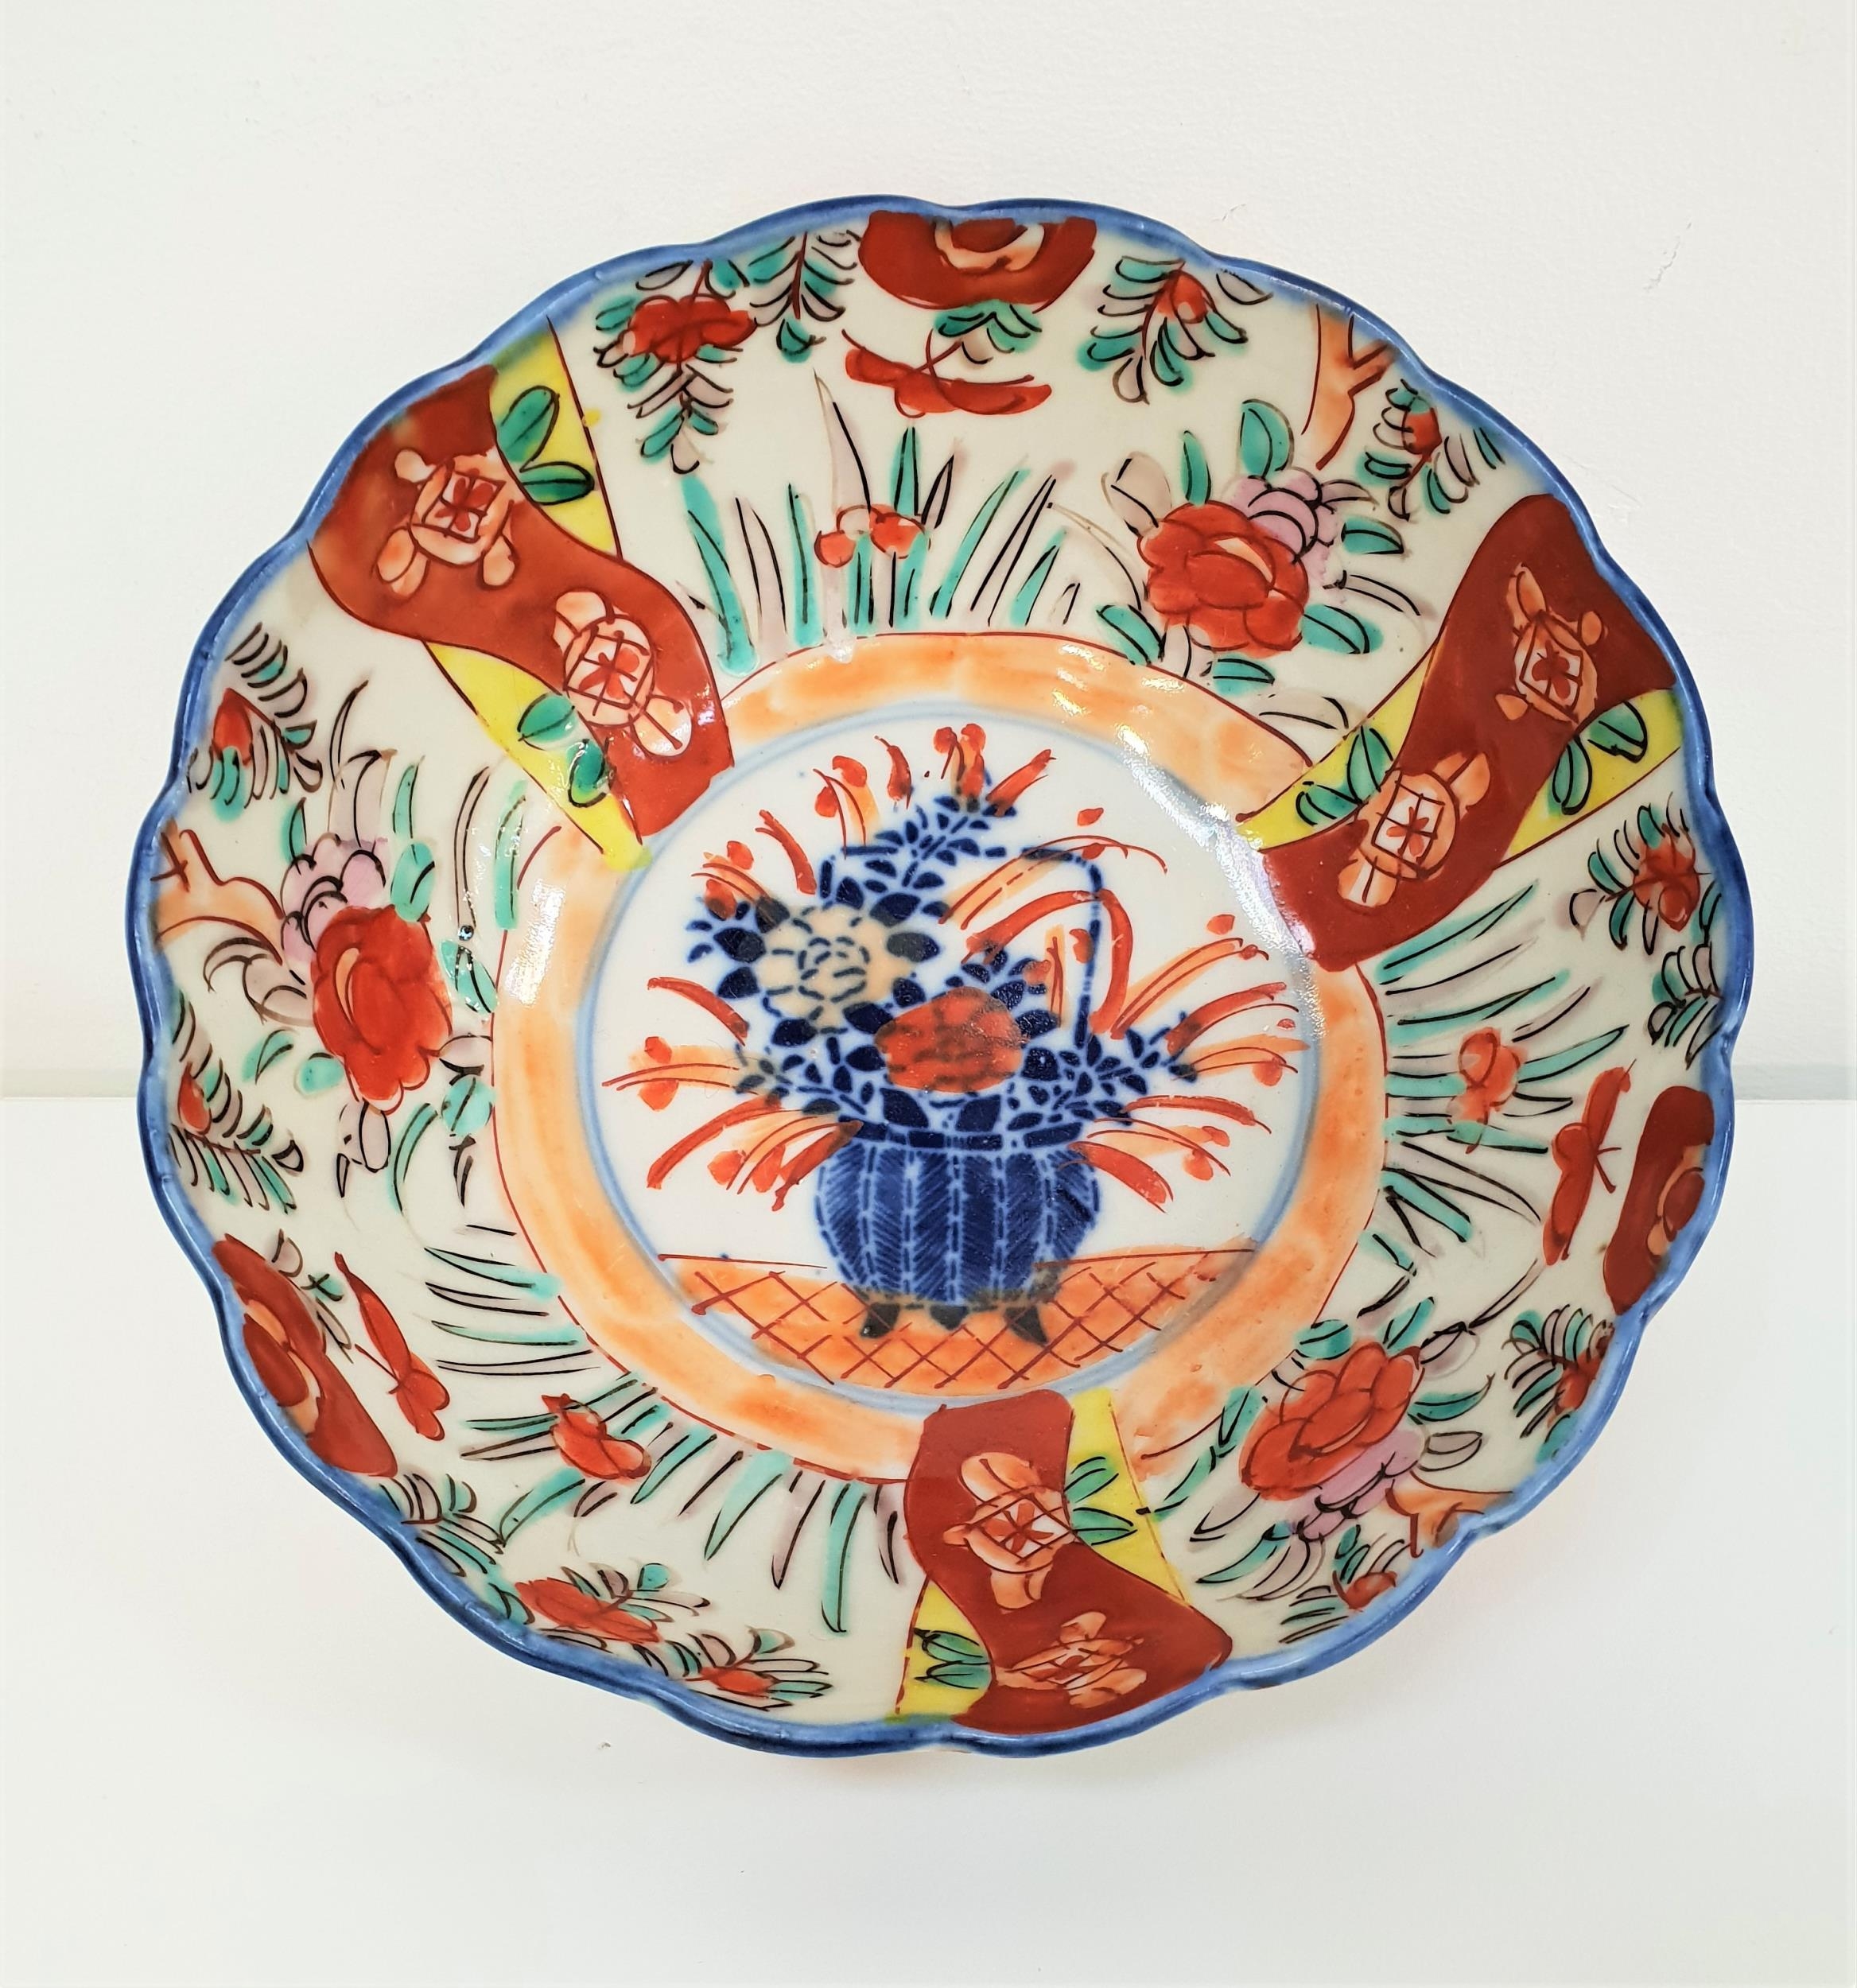 JAPANESE IMARI BOWL with a wavy rim and decorated with flowers, 18.5cm diameter